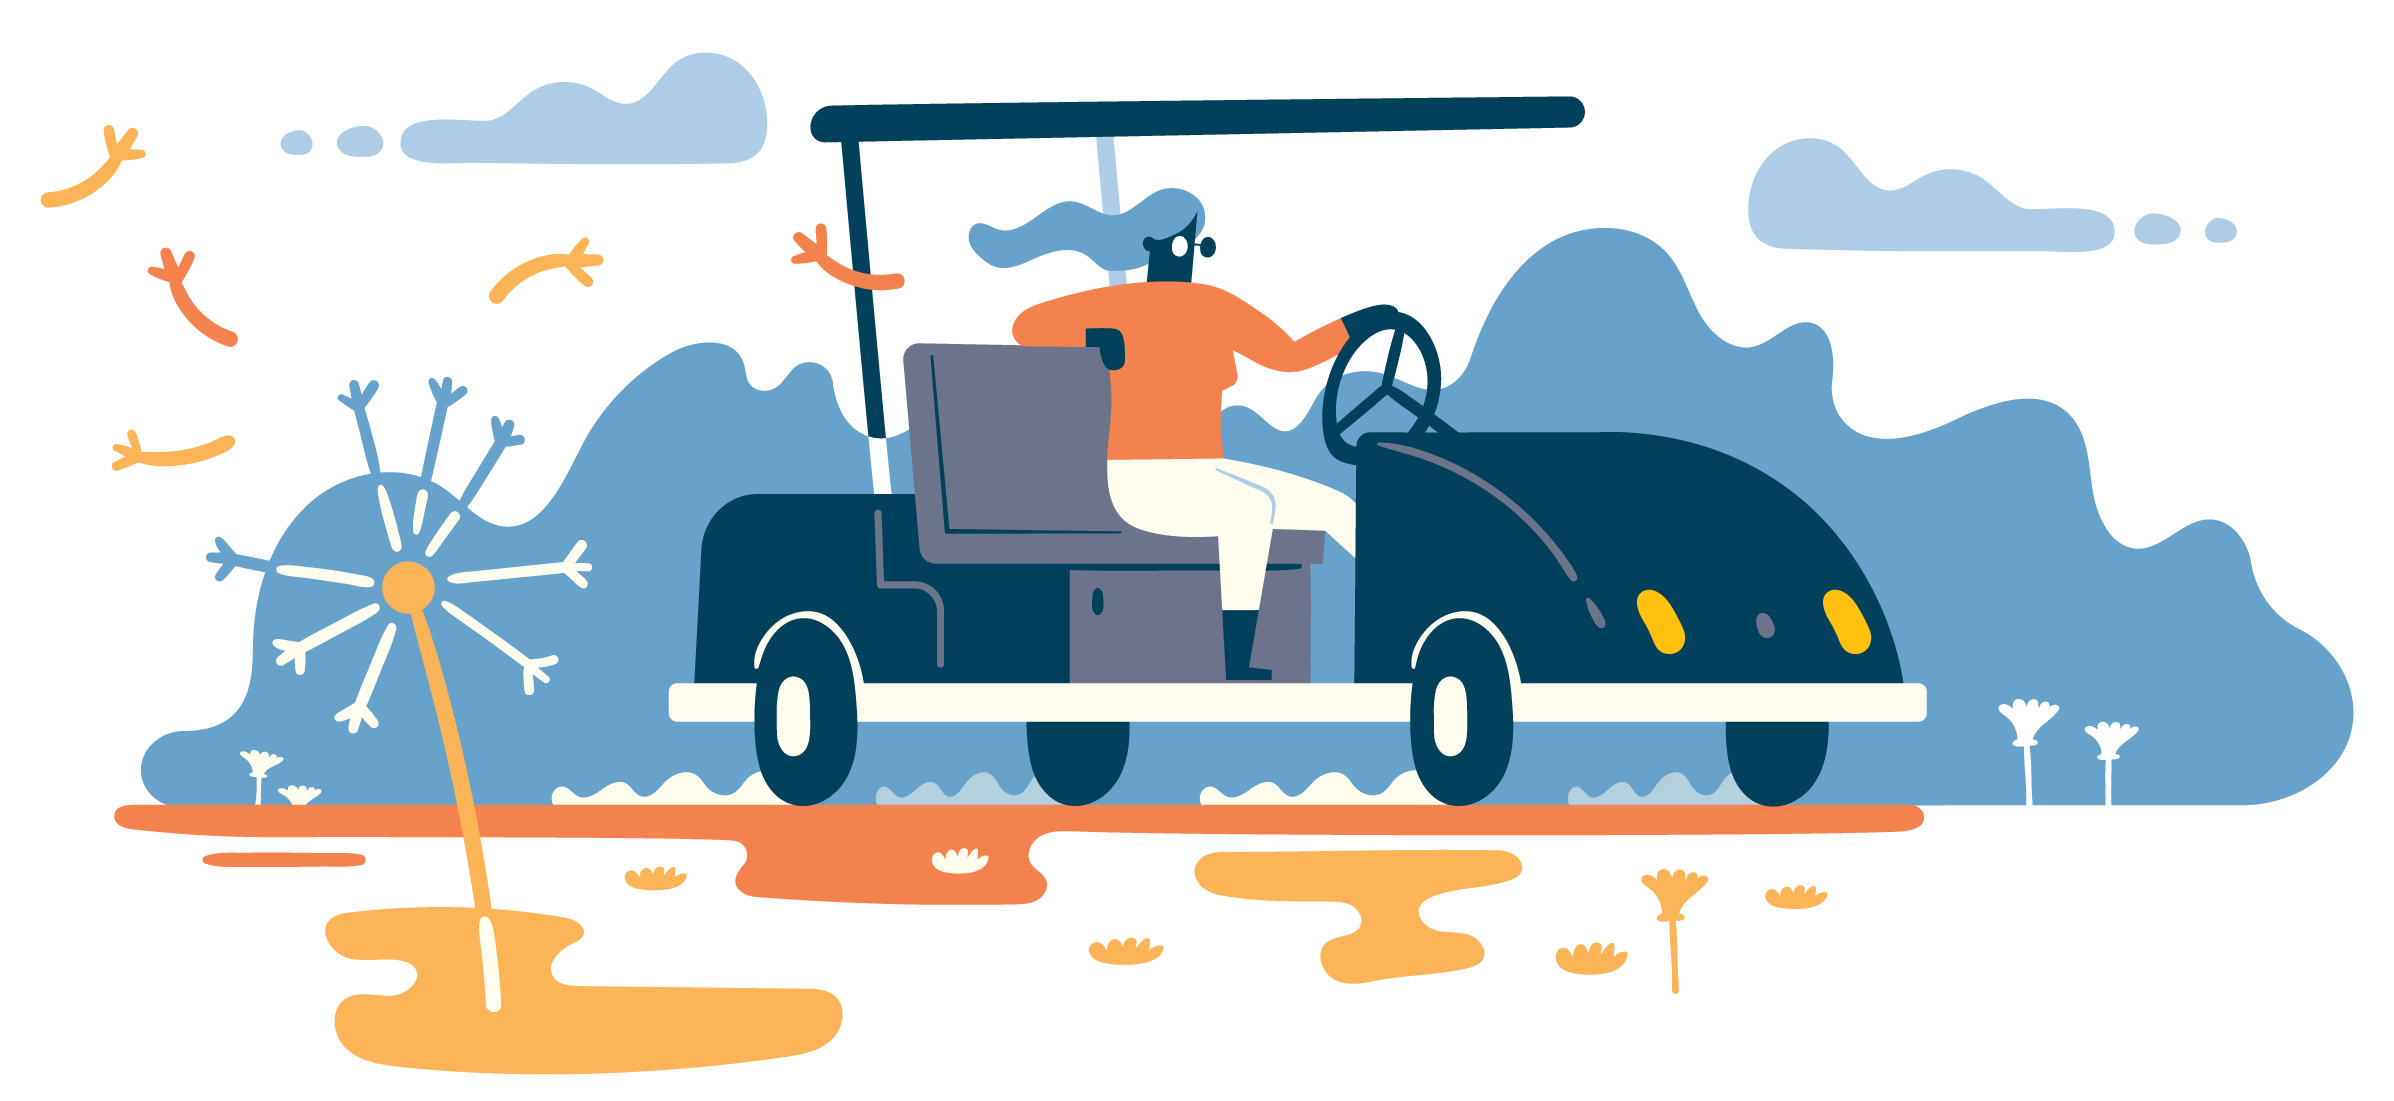 An illustration of a person driving a golf cart